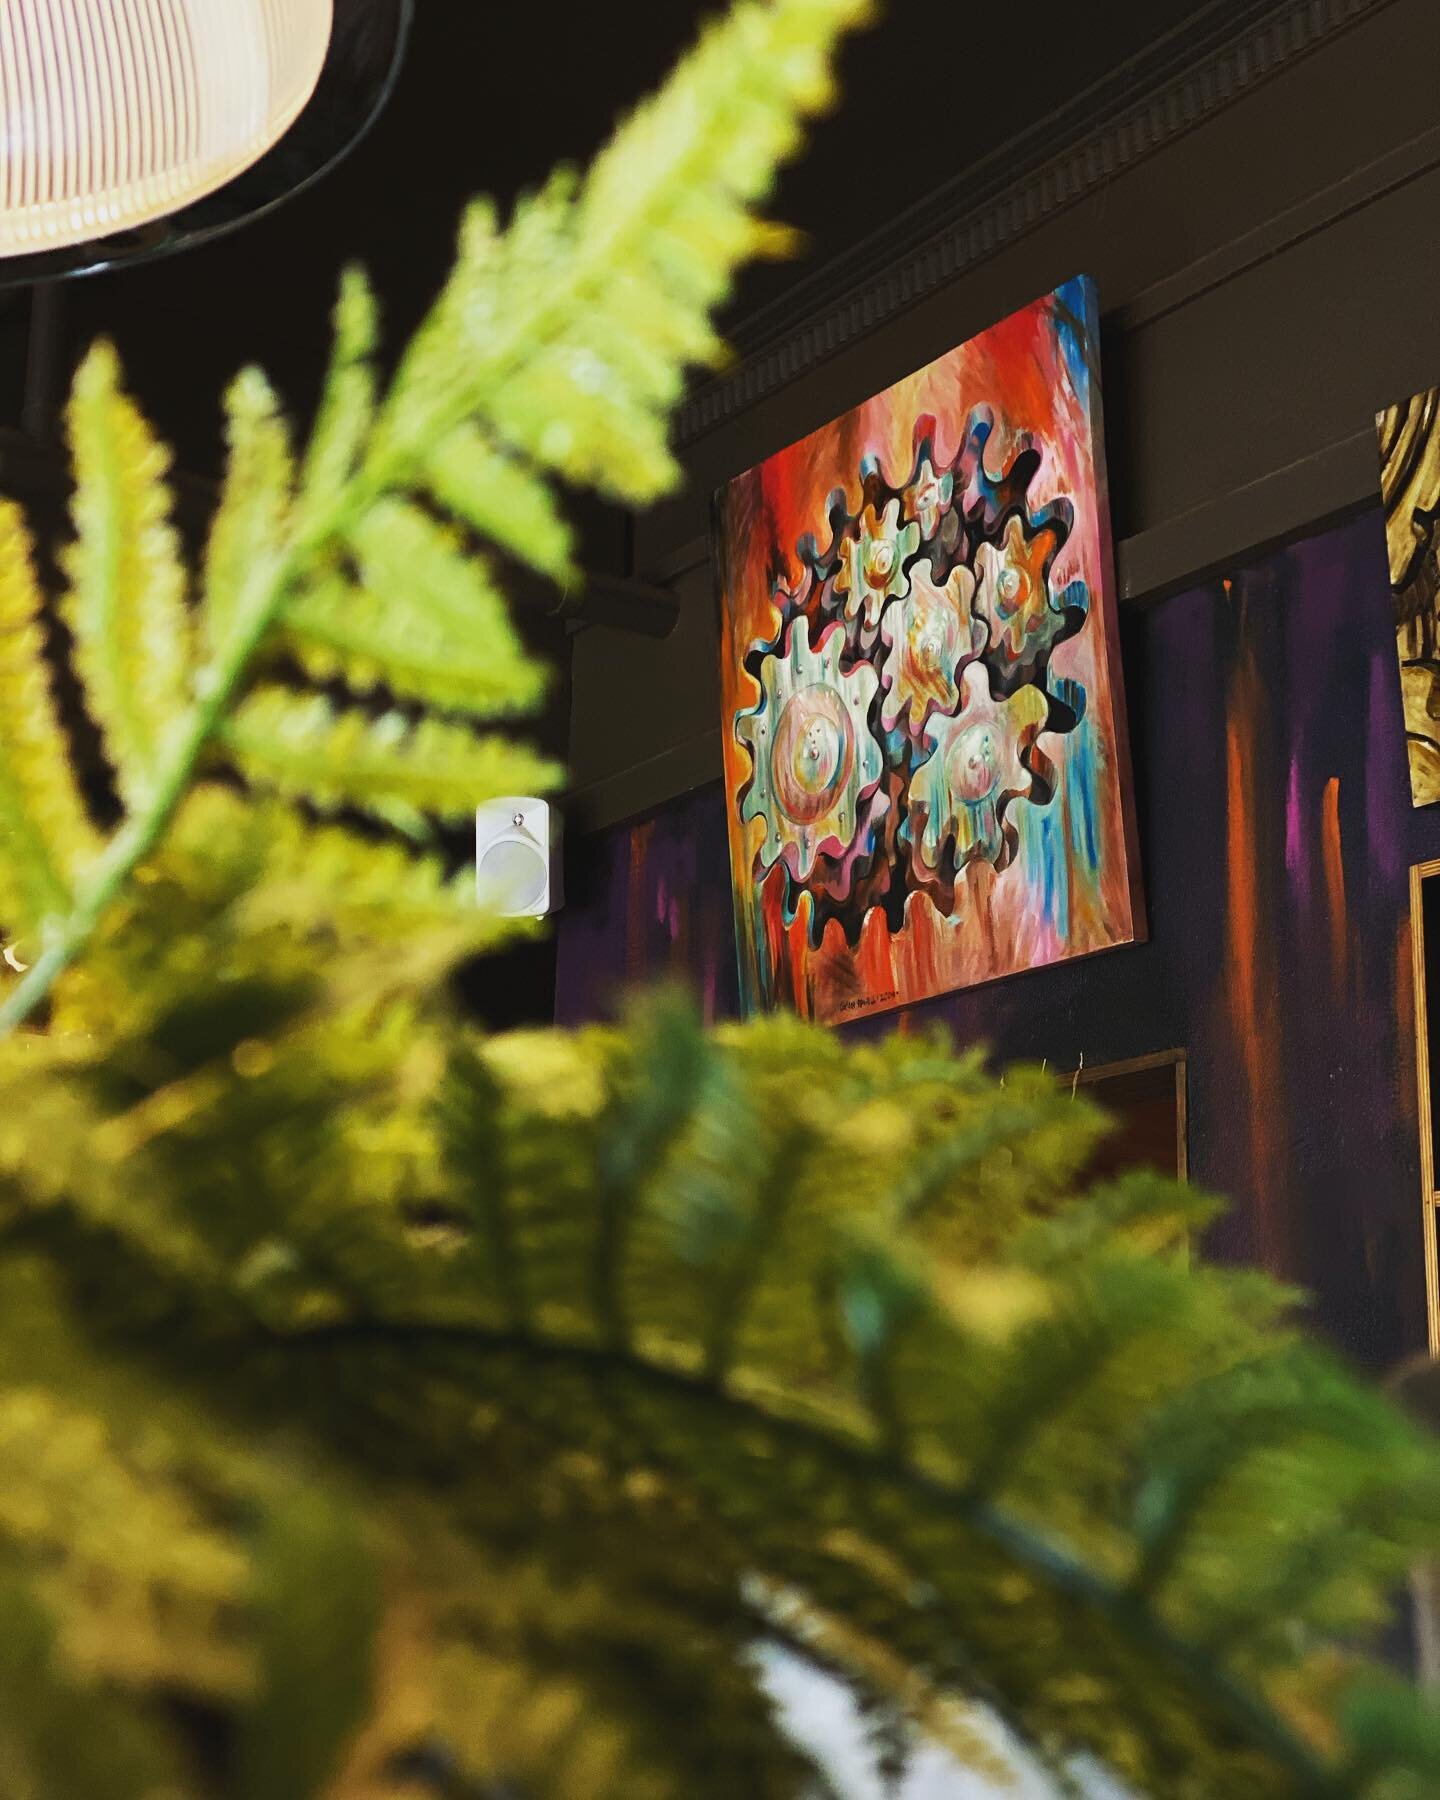 Bittersweet is now serving delicious coffee and food with mesmerising art by @simonsawell 
Come down and enjoy your breakfast with this view..
#kingston #coffee #art #canberra #peace